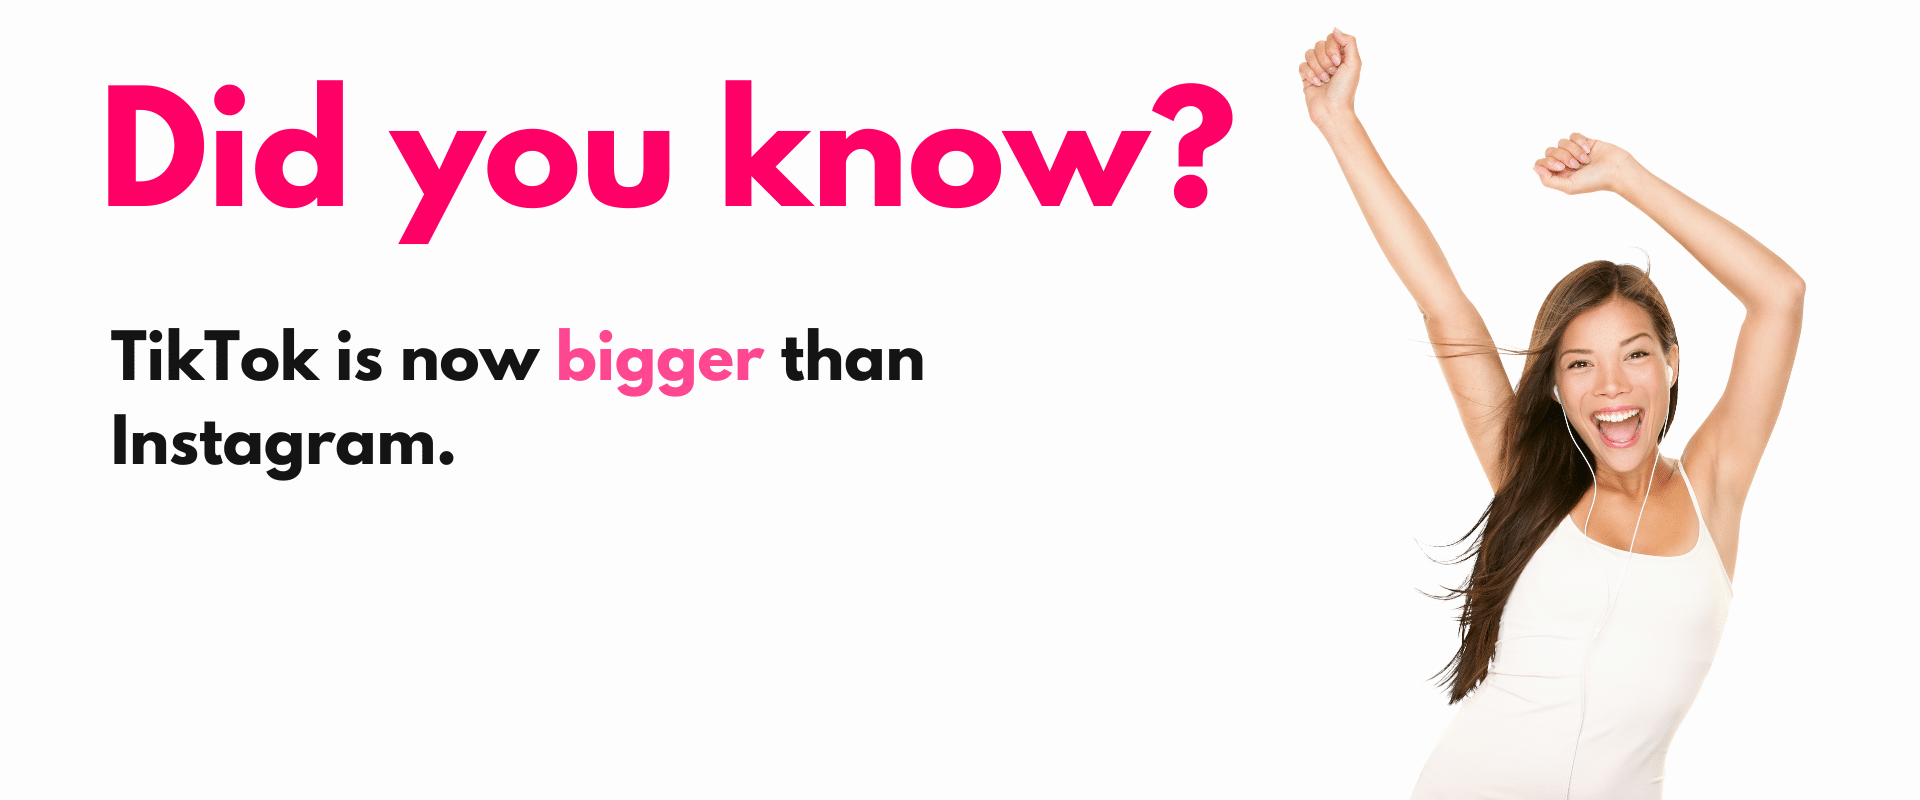 Did you know? tiktok is now bigger than instagram.